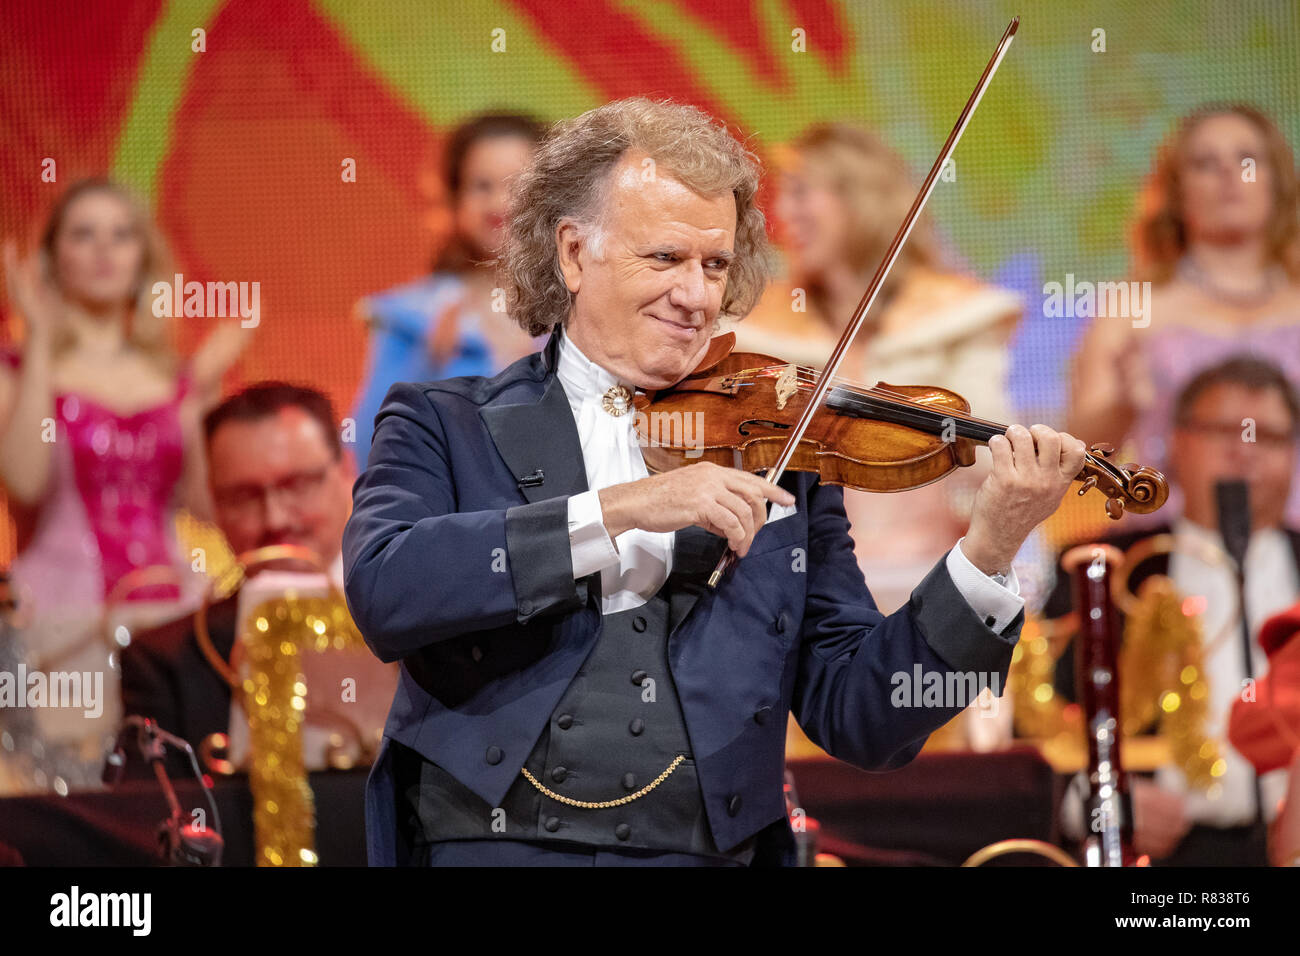 London, England. 12th December 2018, (EXCLUSIVE COVERAGE) André Rieu performs at London‑Wembley ‑ The SSE Arena ,England, Credit: Jason Richardson/Alamy Live News Stock Photo